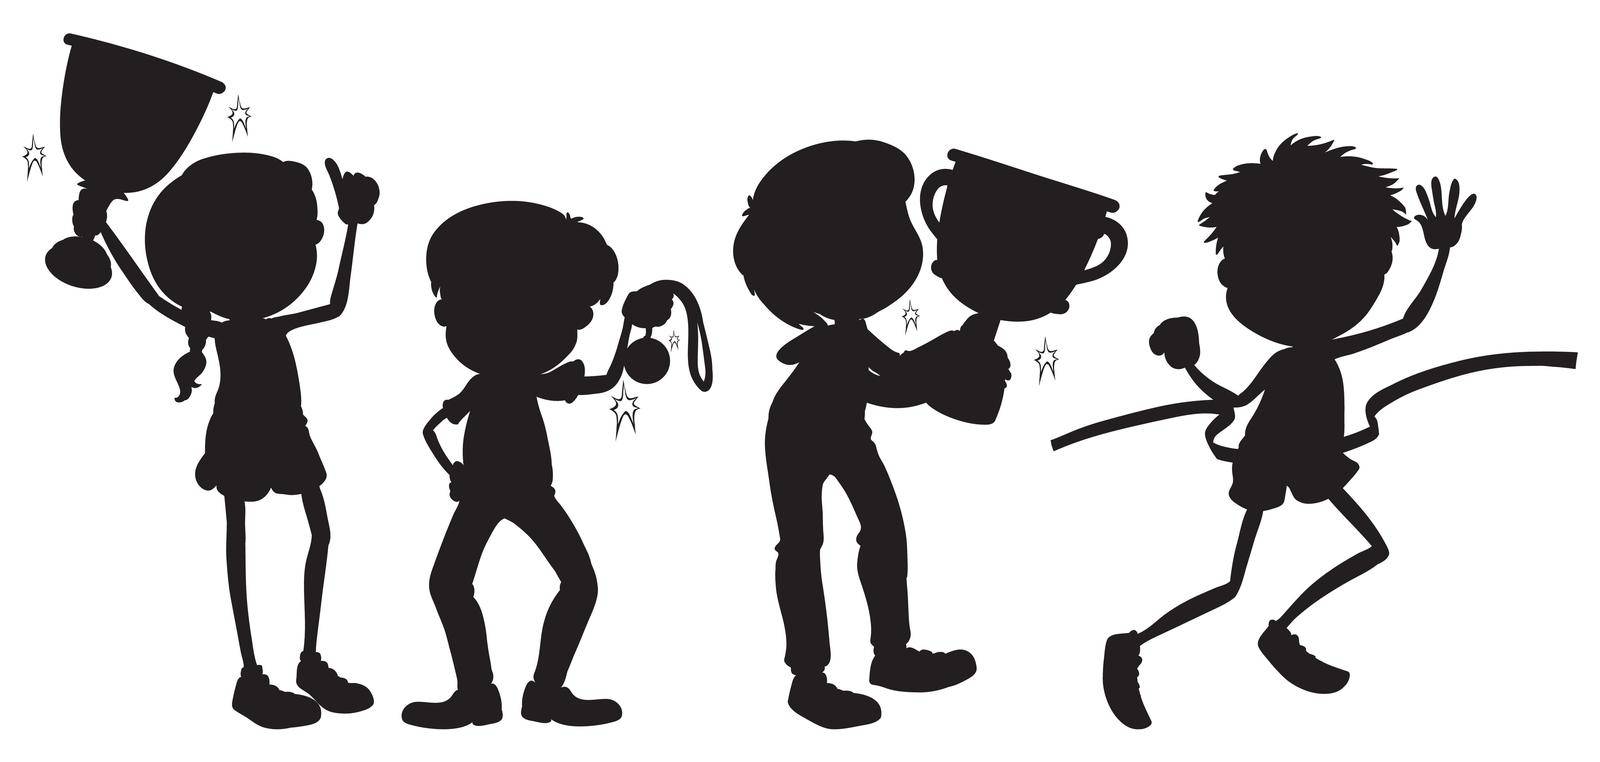 Illustration of a set of silhouette people with trophy